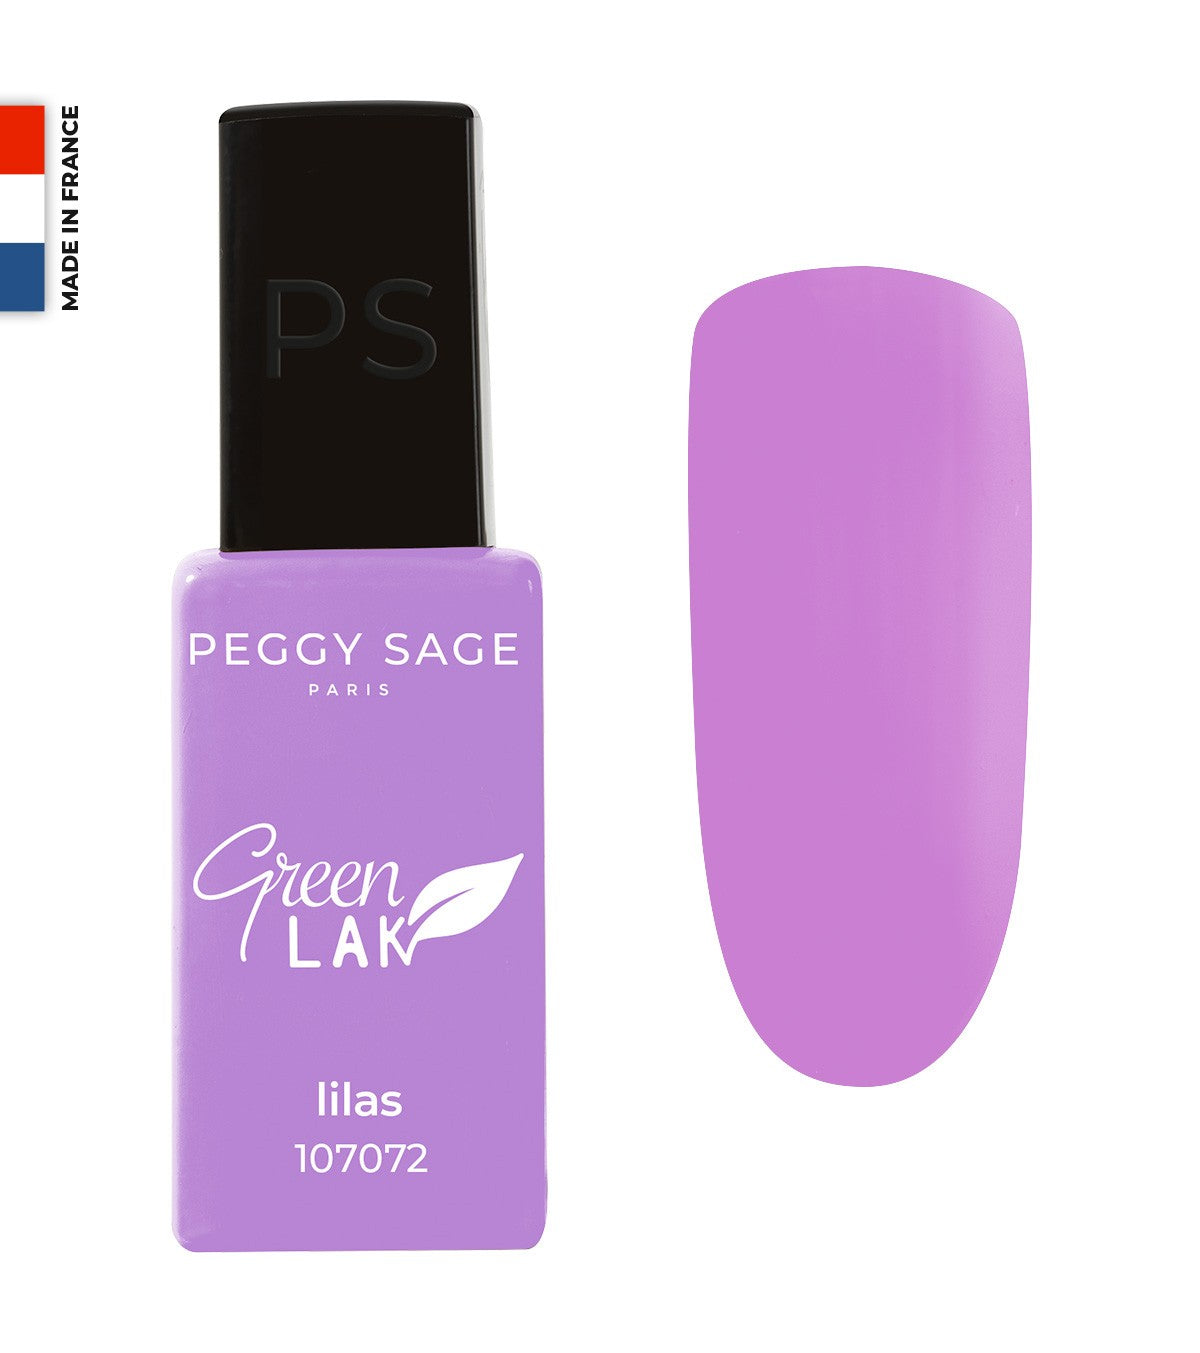 NEW GREEN LACQUER Lilas Ref 107072